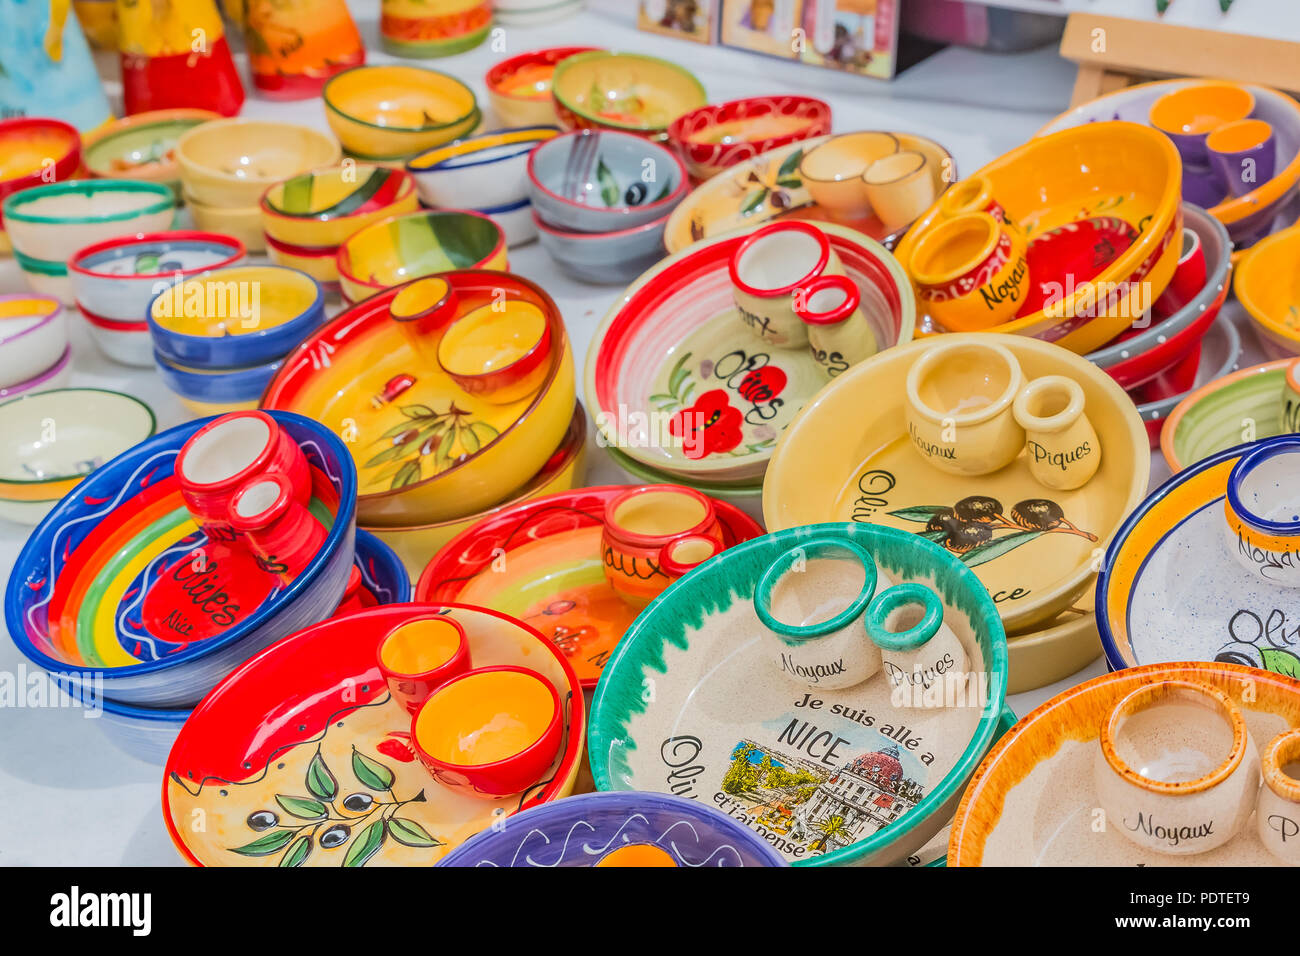 Colorful souvenir pottery dishes made of ceramics at a market stall at the Cours Saleya, famous market in Nice, that is known for hand made gifts, flo Stock Photo